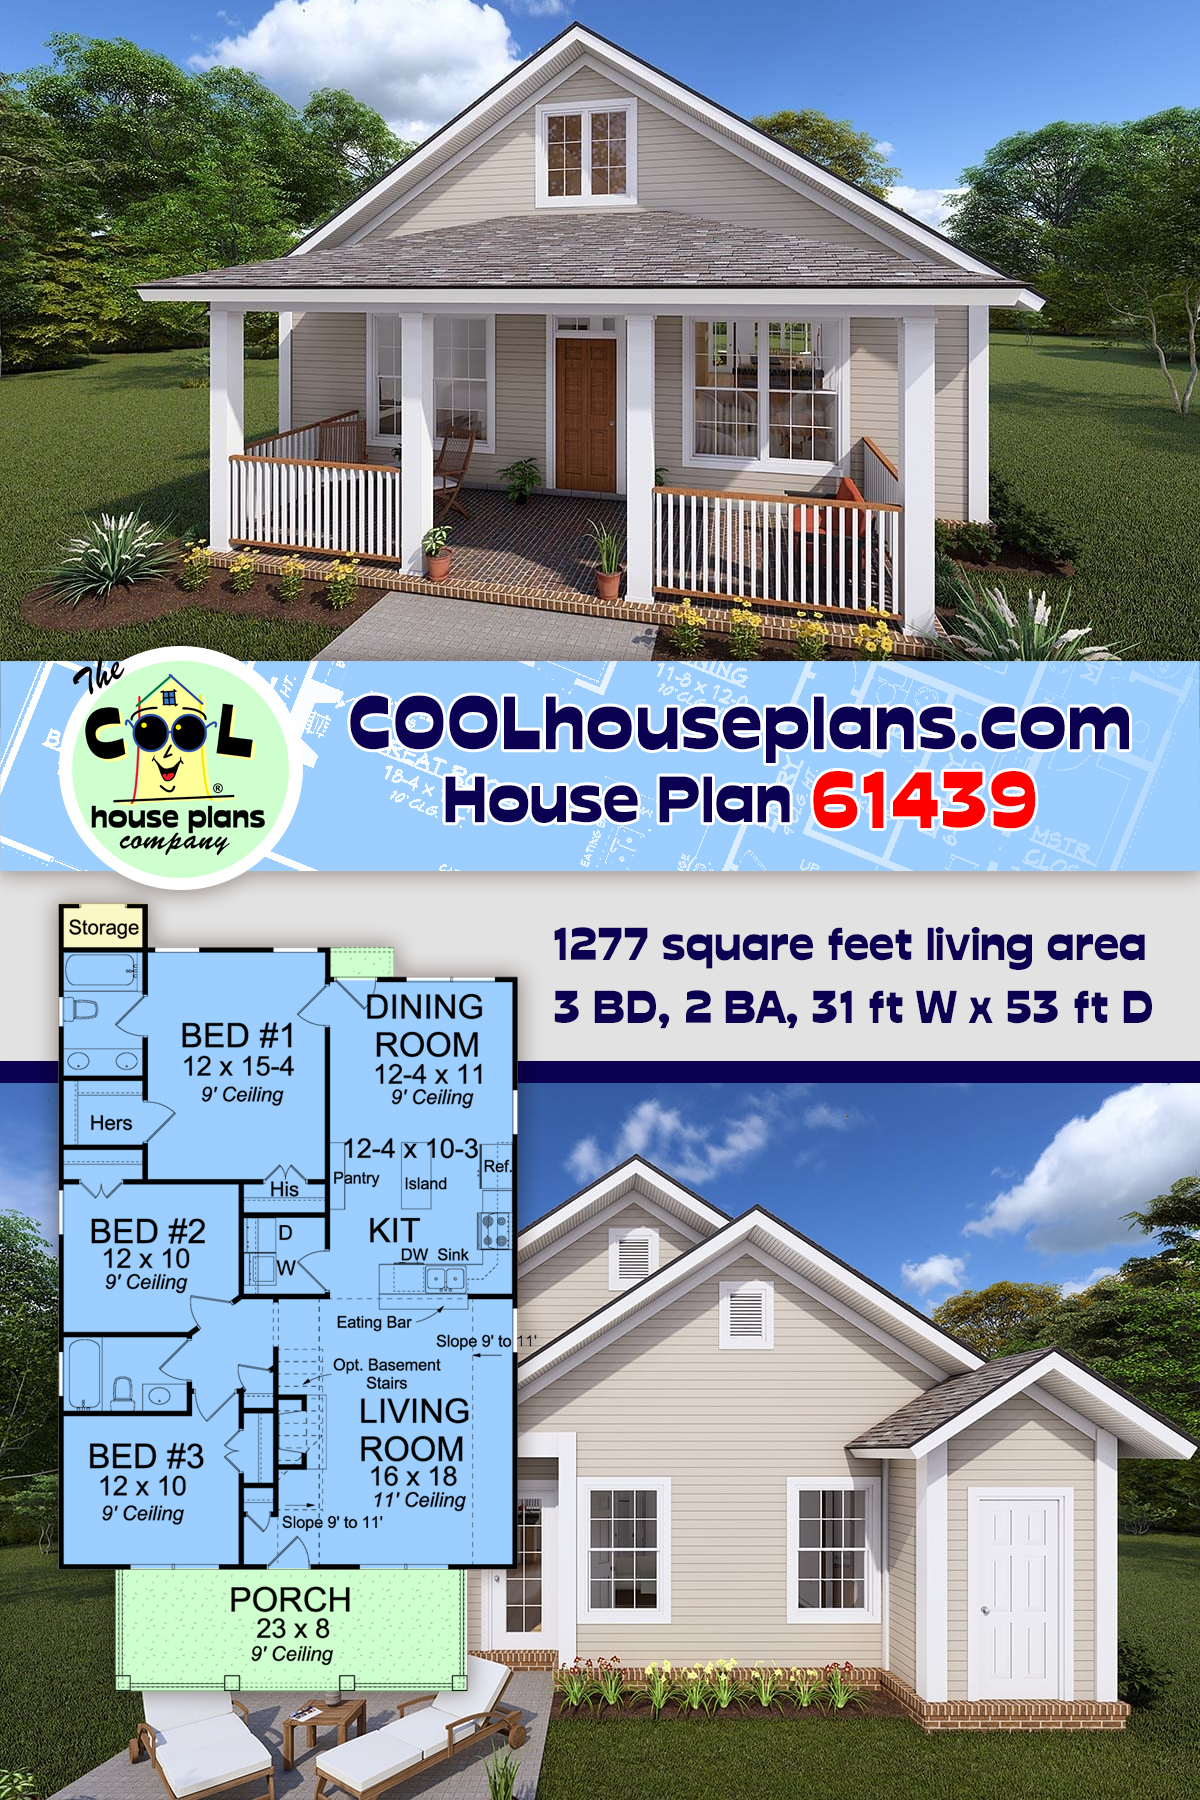 Cottage, Country, Southern, Traditional House Plan 61439 with 3 Beds, 2 Baths